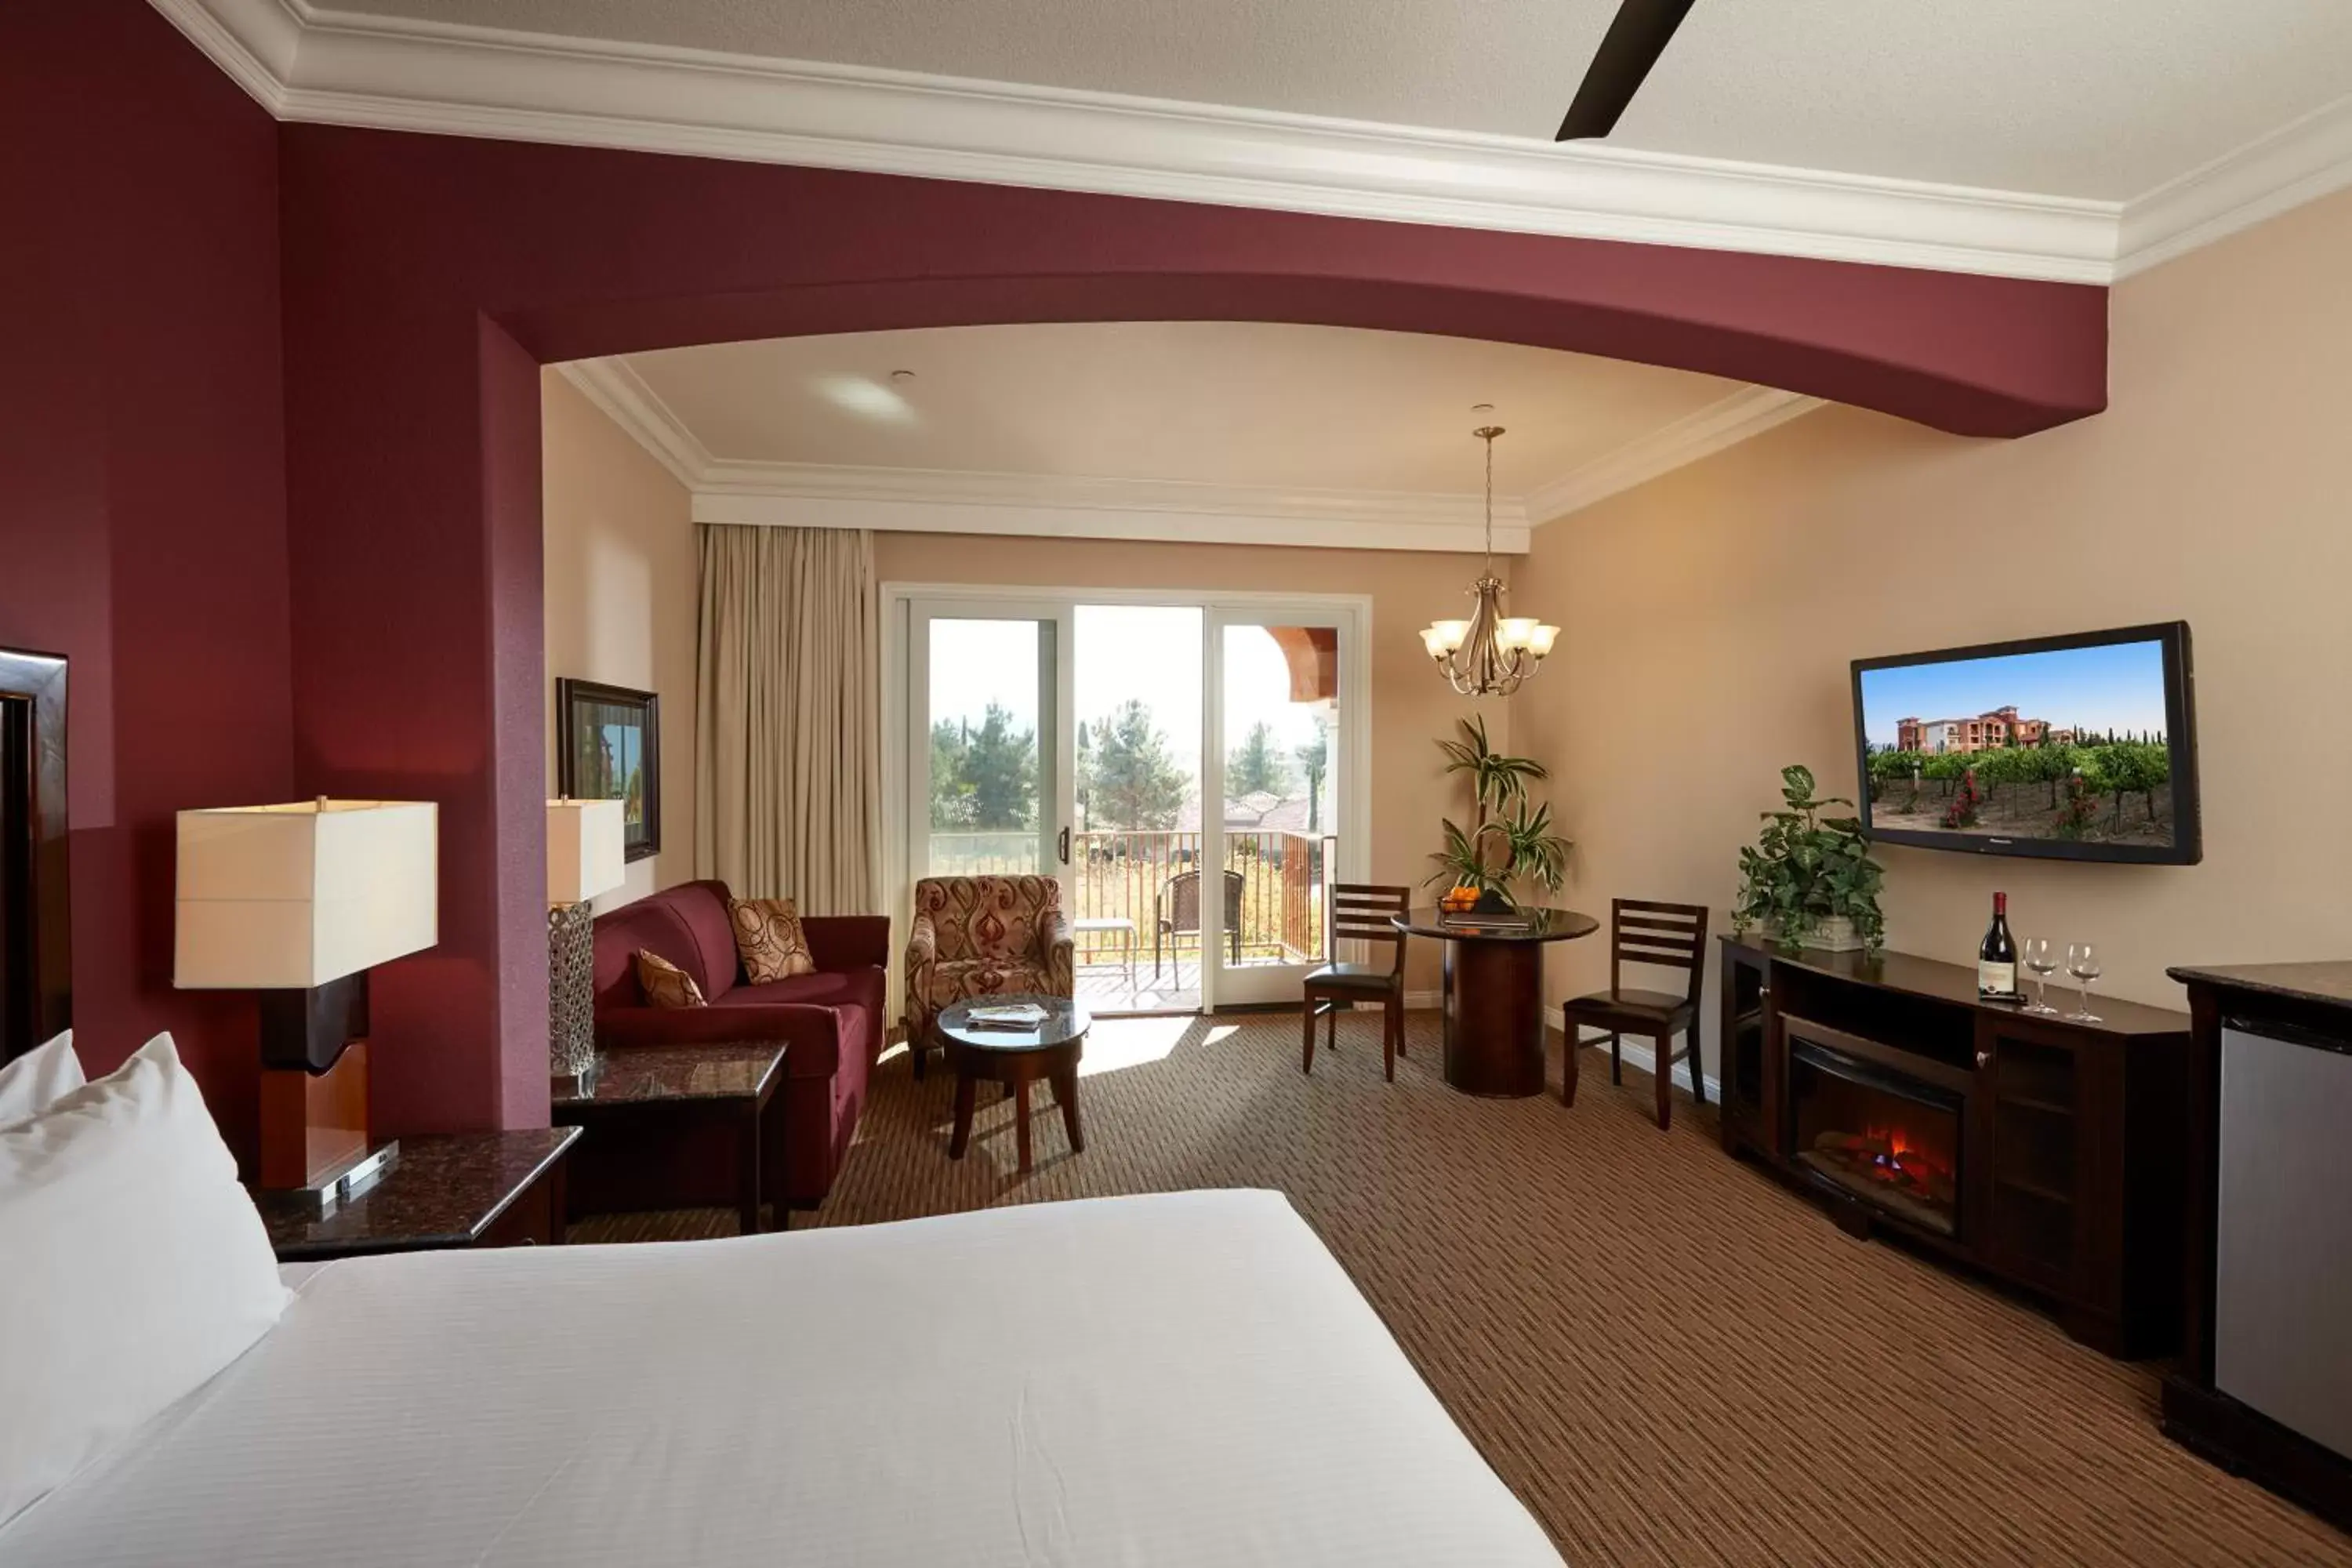 Bedroom, TV/Entertainment Center in South Coast Winery Resort & Spa